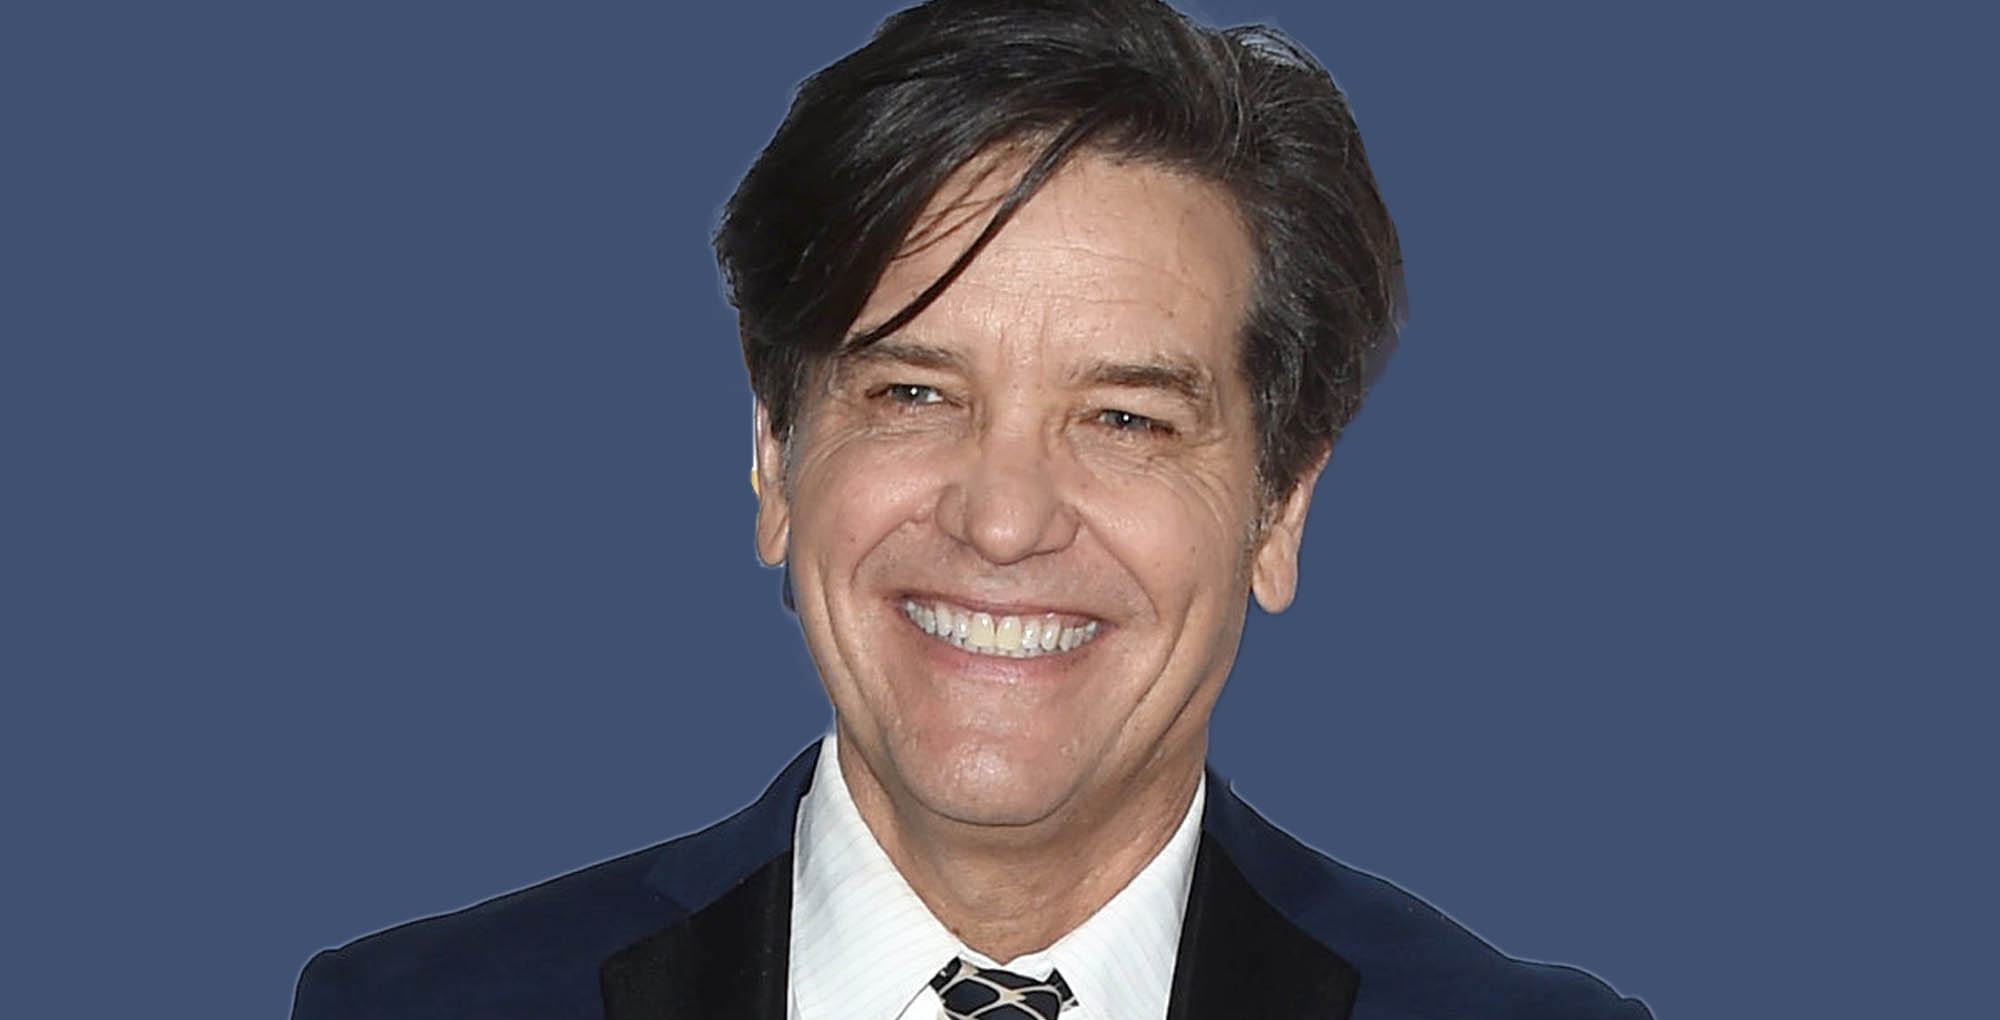 michael damian returns to young and the restless as daniel romalotti.